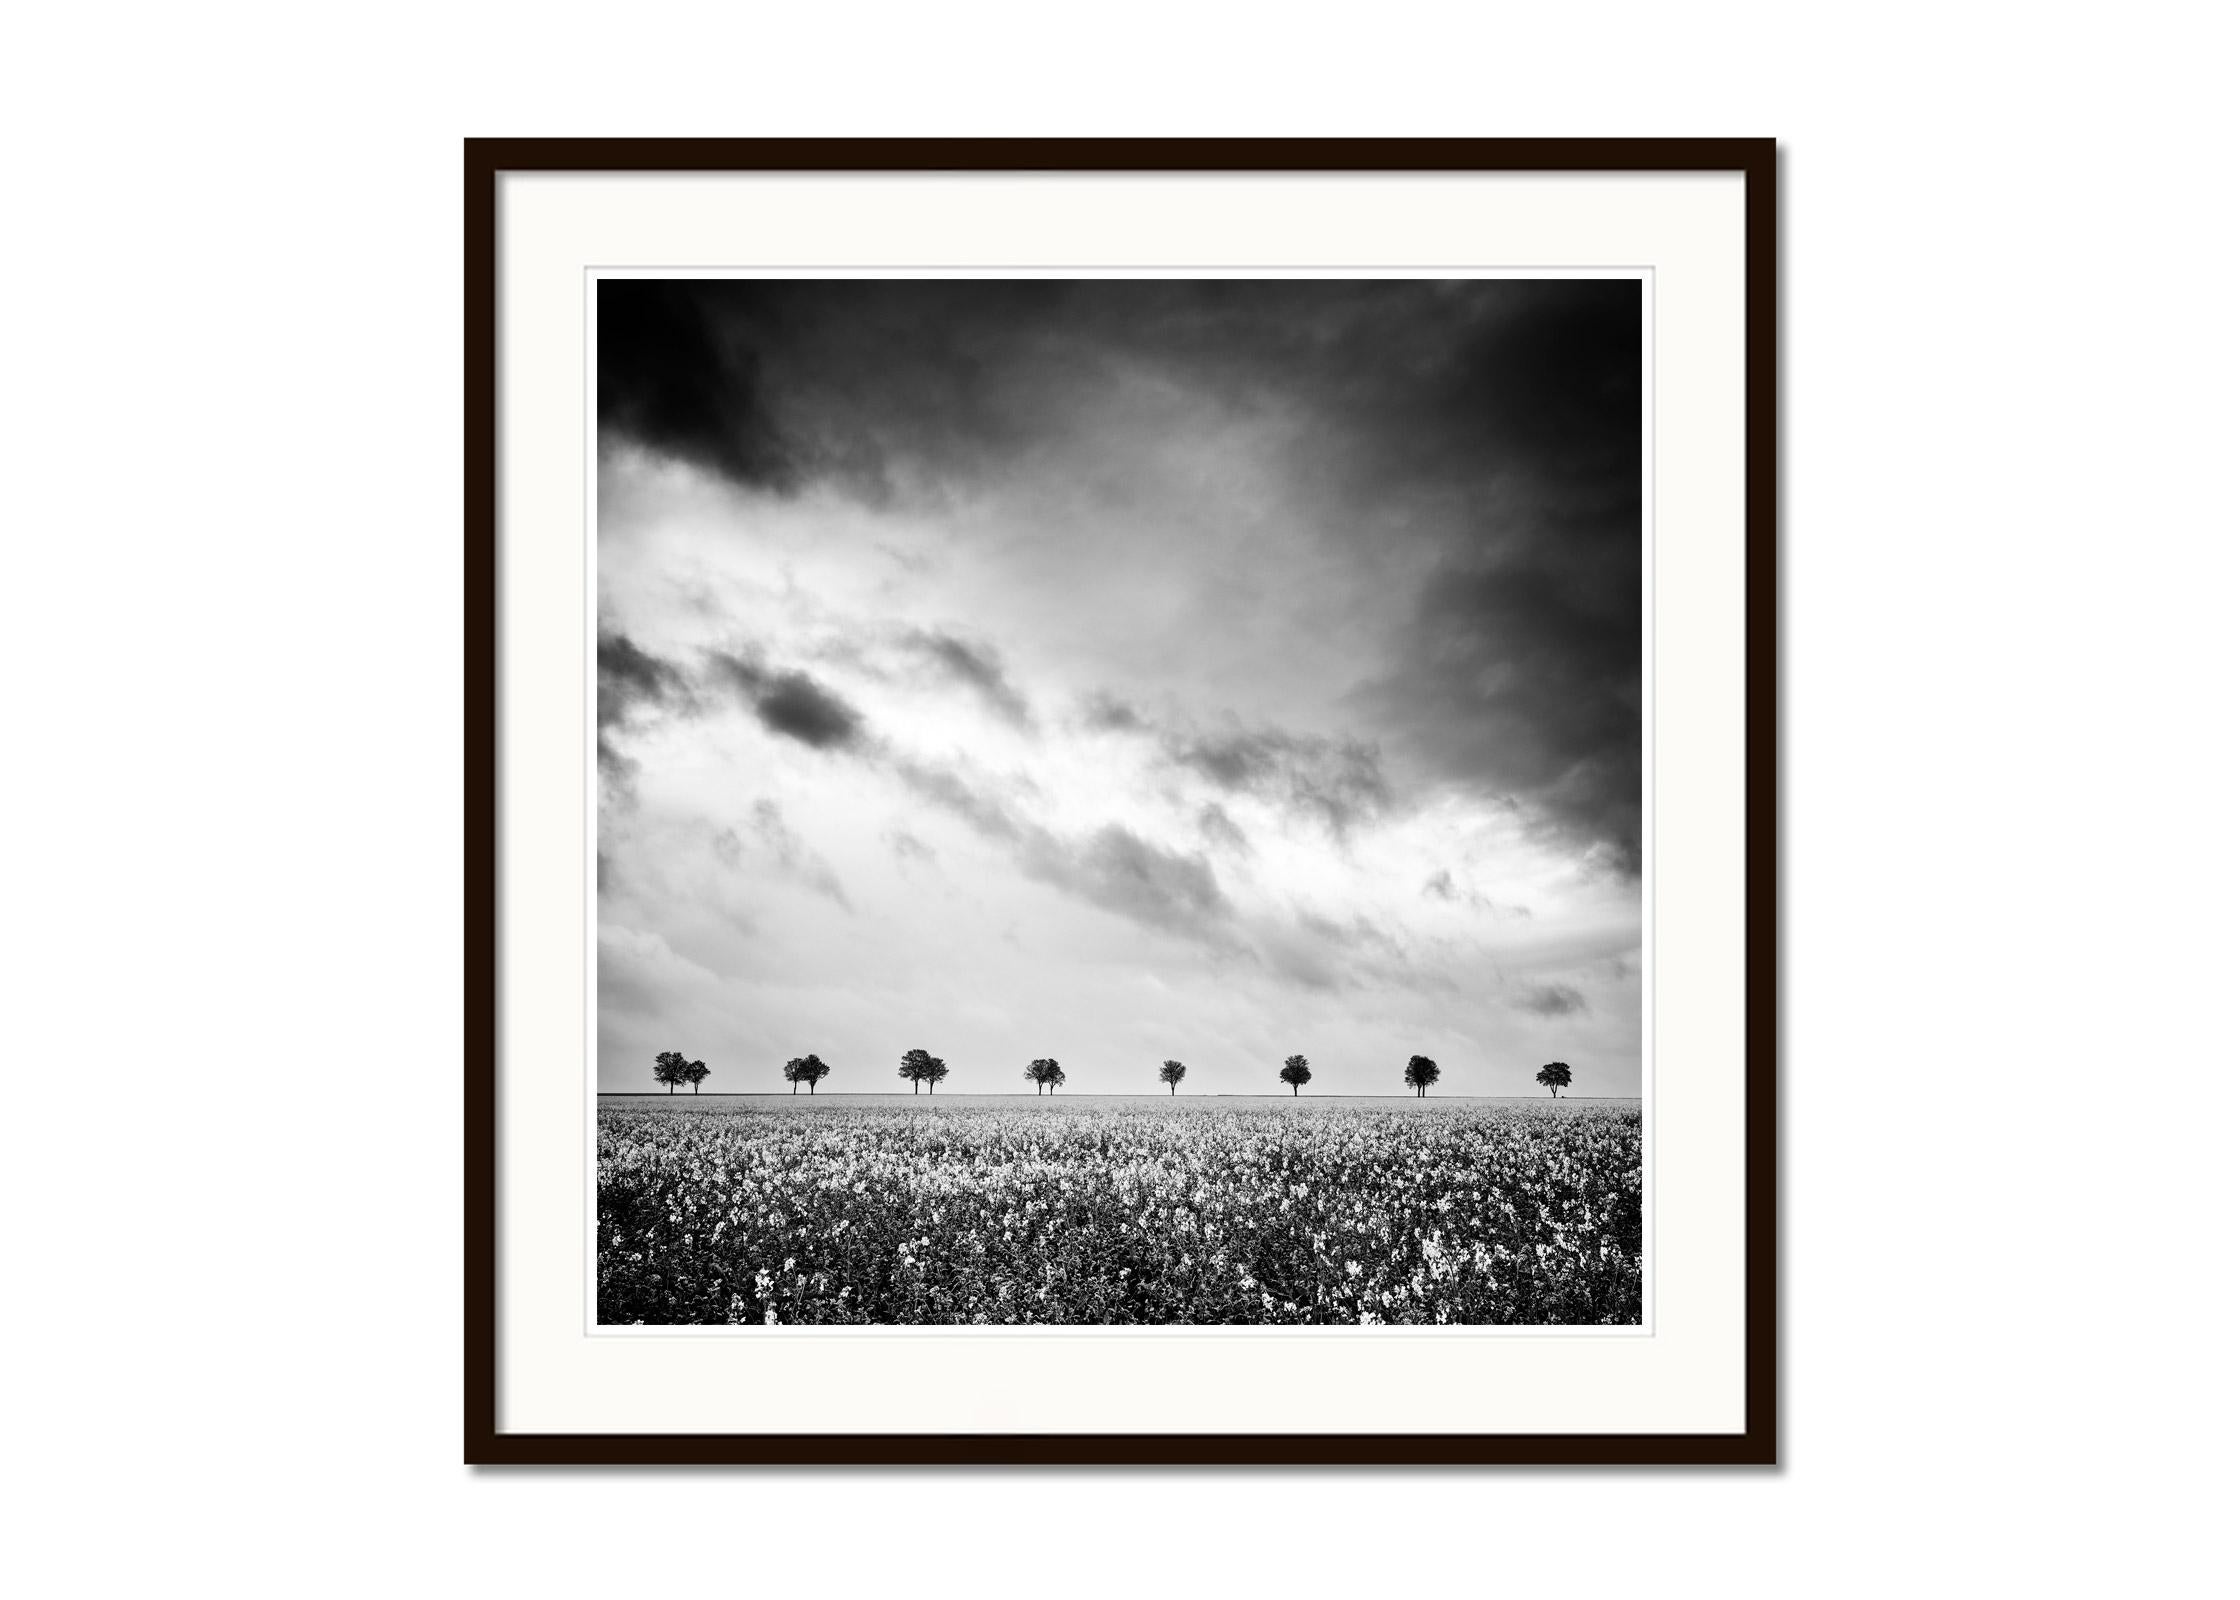 Black and White Fine Art Landscape Photography. Row of trees on the rapeseed field with great cloud mood, France. Archival pigment ink print, edition of 7. Signed, titled, dated and numbered by artist. Certificate of authenticity included. Printed